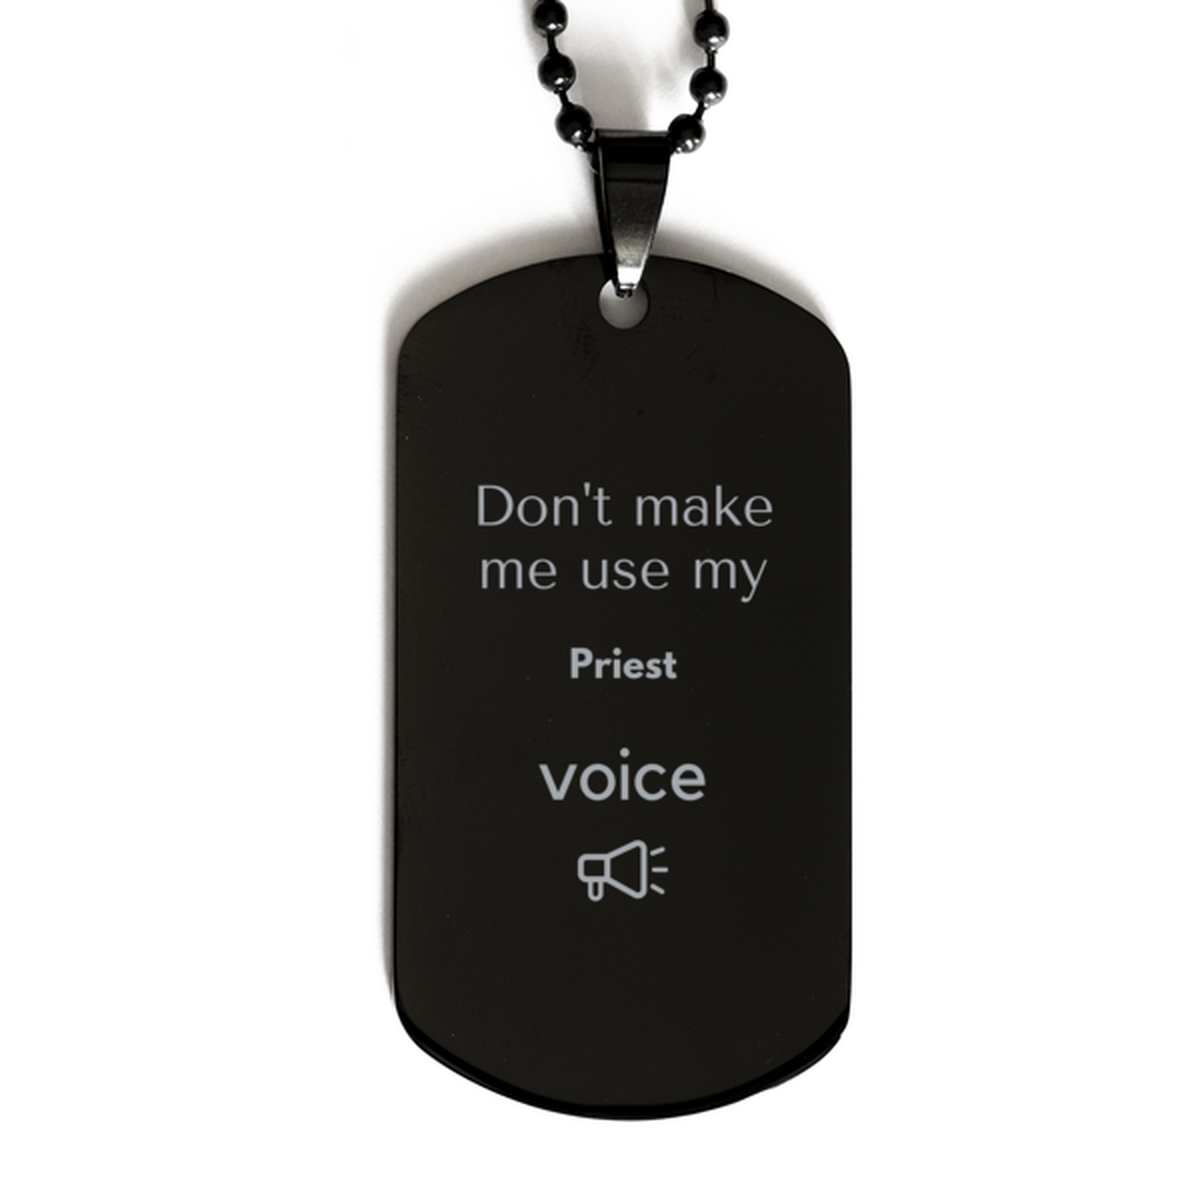 Don't make me use my Priest voice, Sarcasm Priest Gifts, Christmas Priest Black Dog Tag Birthday Unique Gifts For Priest Coworkers, Men, Women, Colleague, Friends